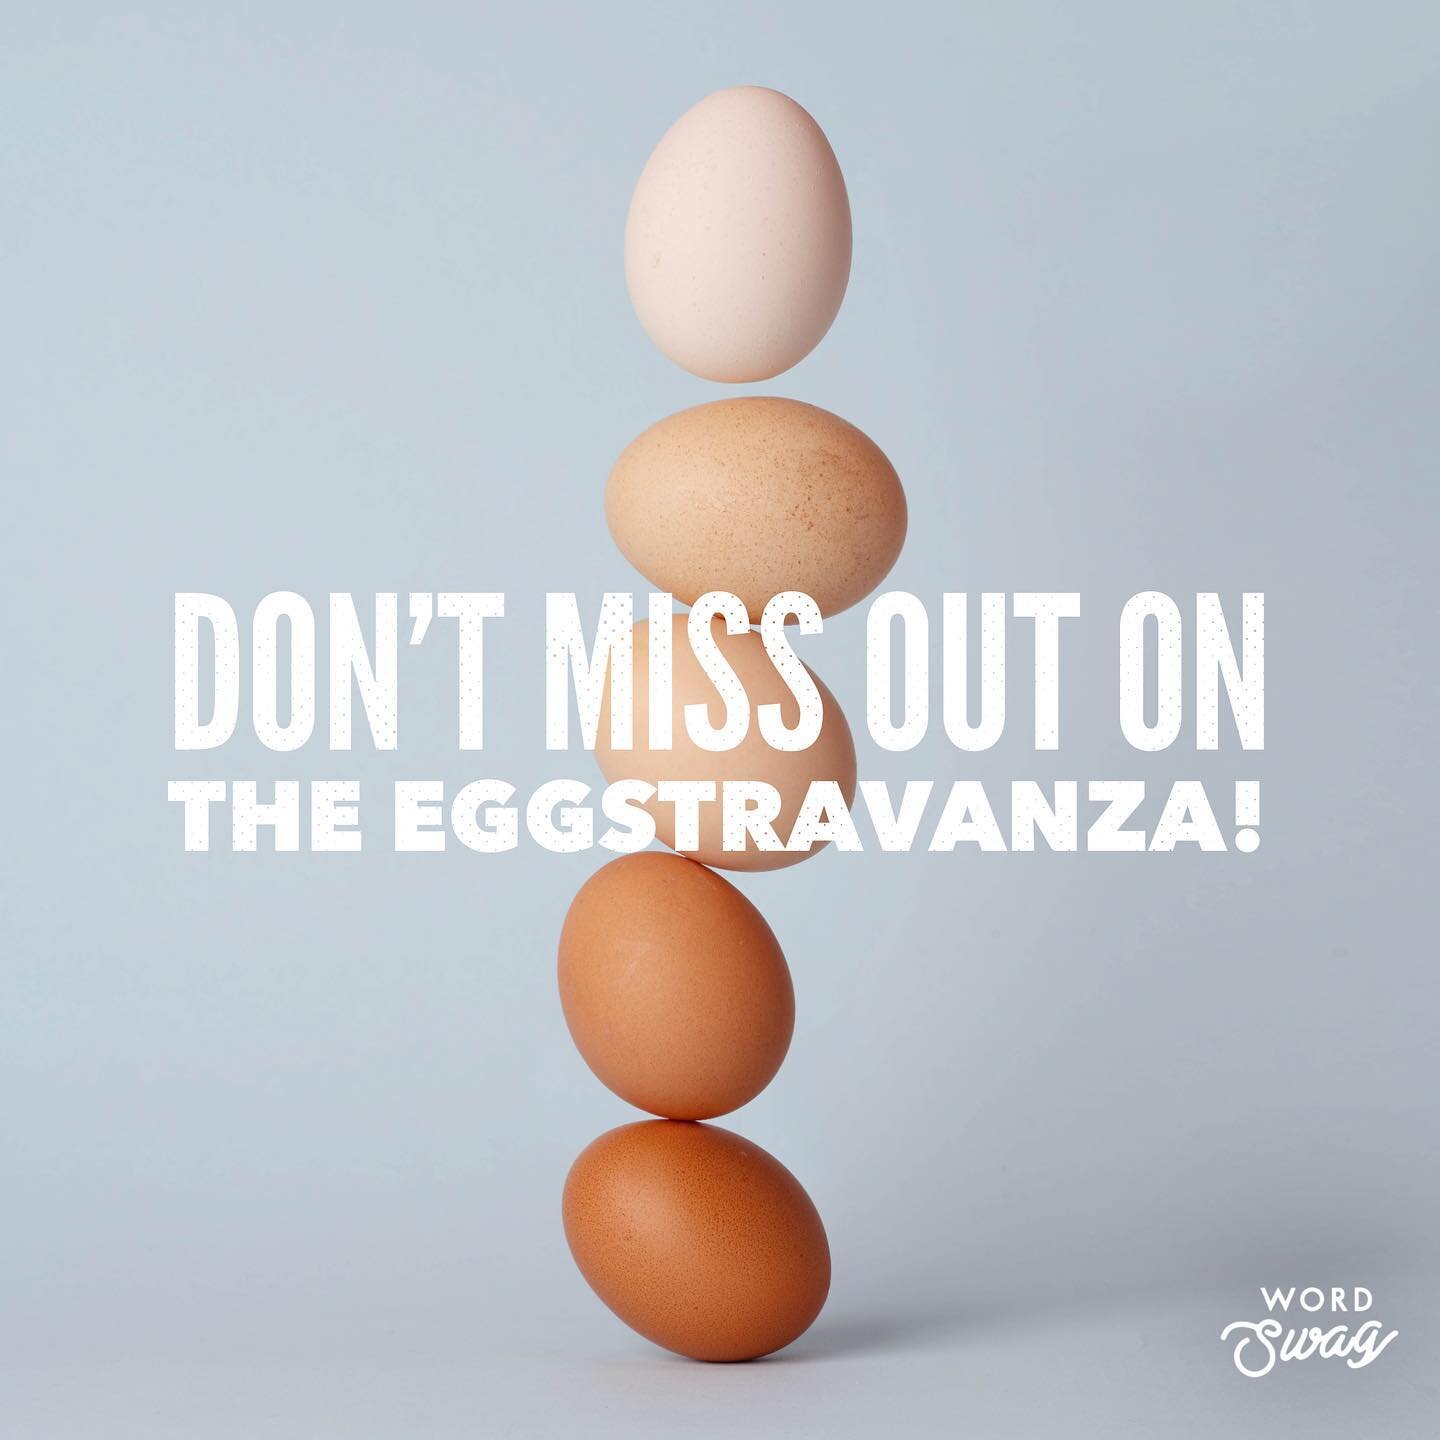 This week at youth, we are having The Eggstravaganza!! Bring some clothes you don&rsquo;t mind getting a bit dirty, and prepare to have a lot of fun with some eggs 🤙